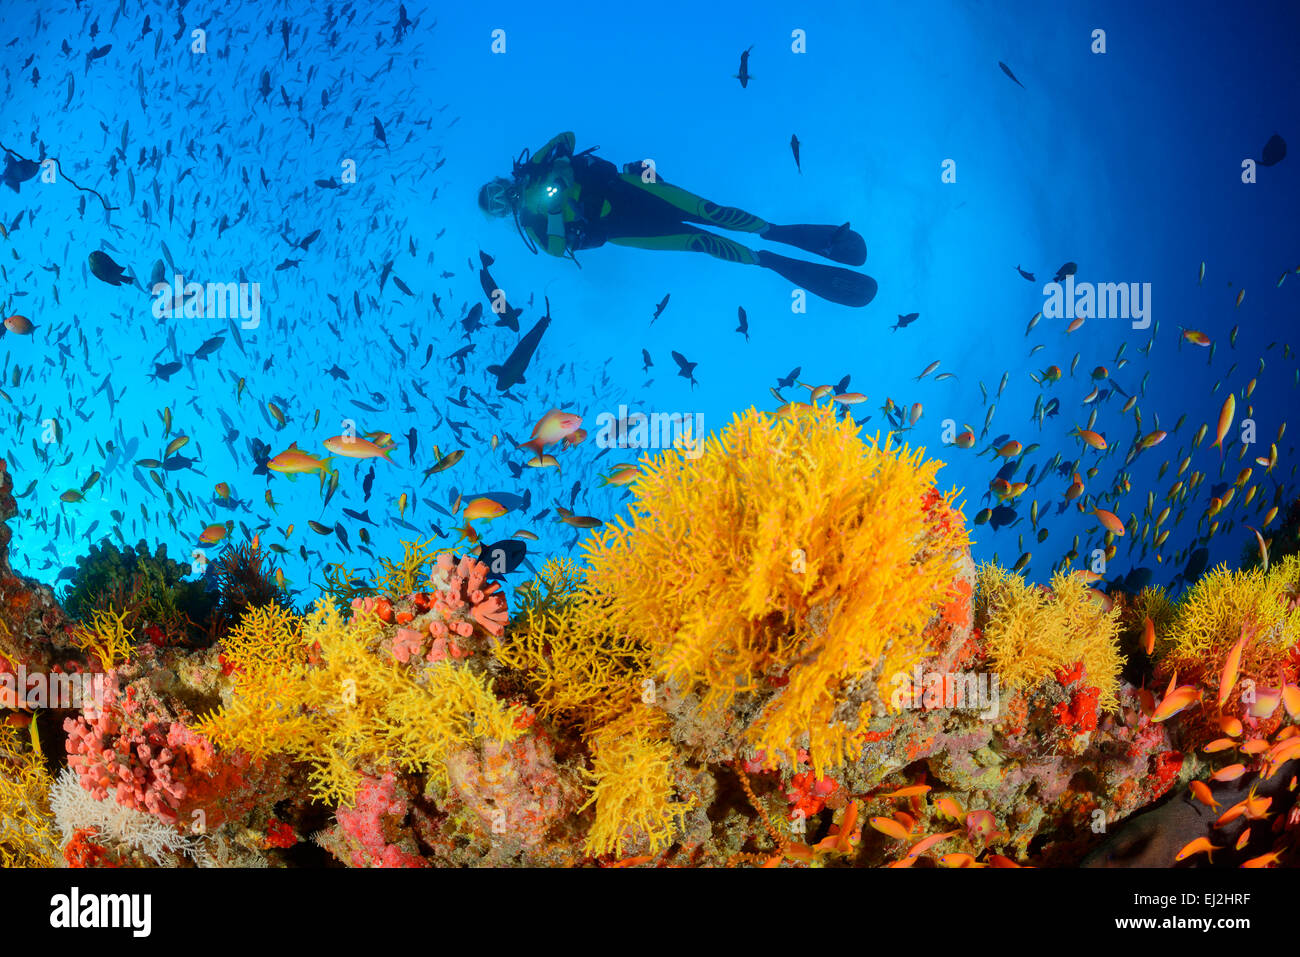 Acabaria sp., Coral reef with Yellow fan coral and scuba diver, Muthafushi Thila, Baa Atoll, Maldives, Indian Ocean Stock Photo